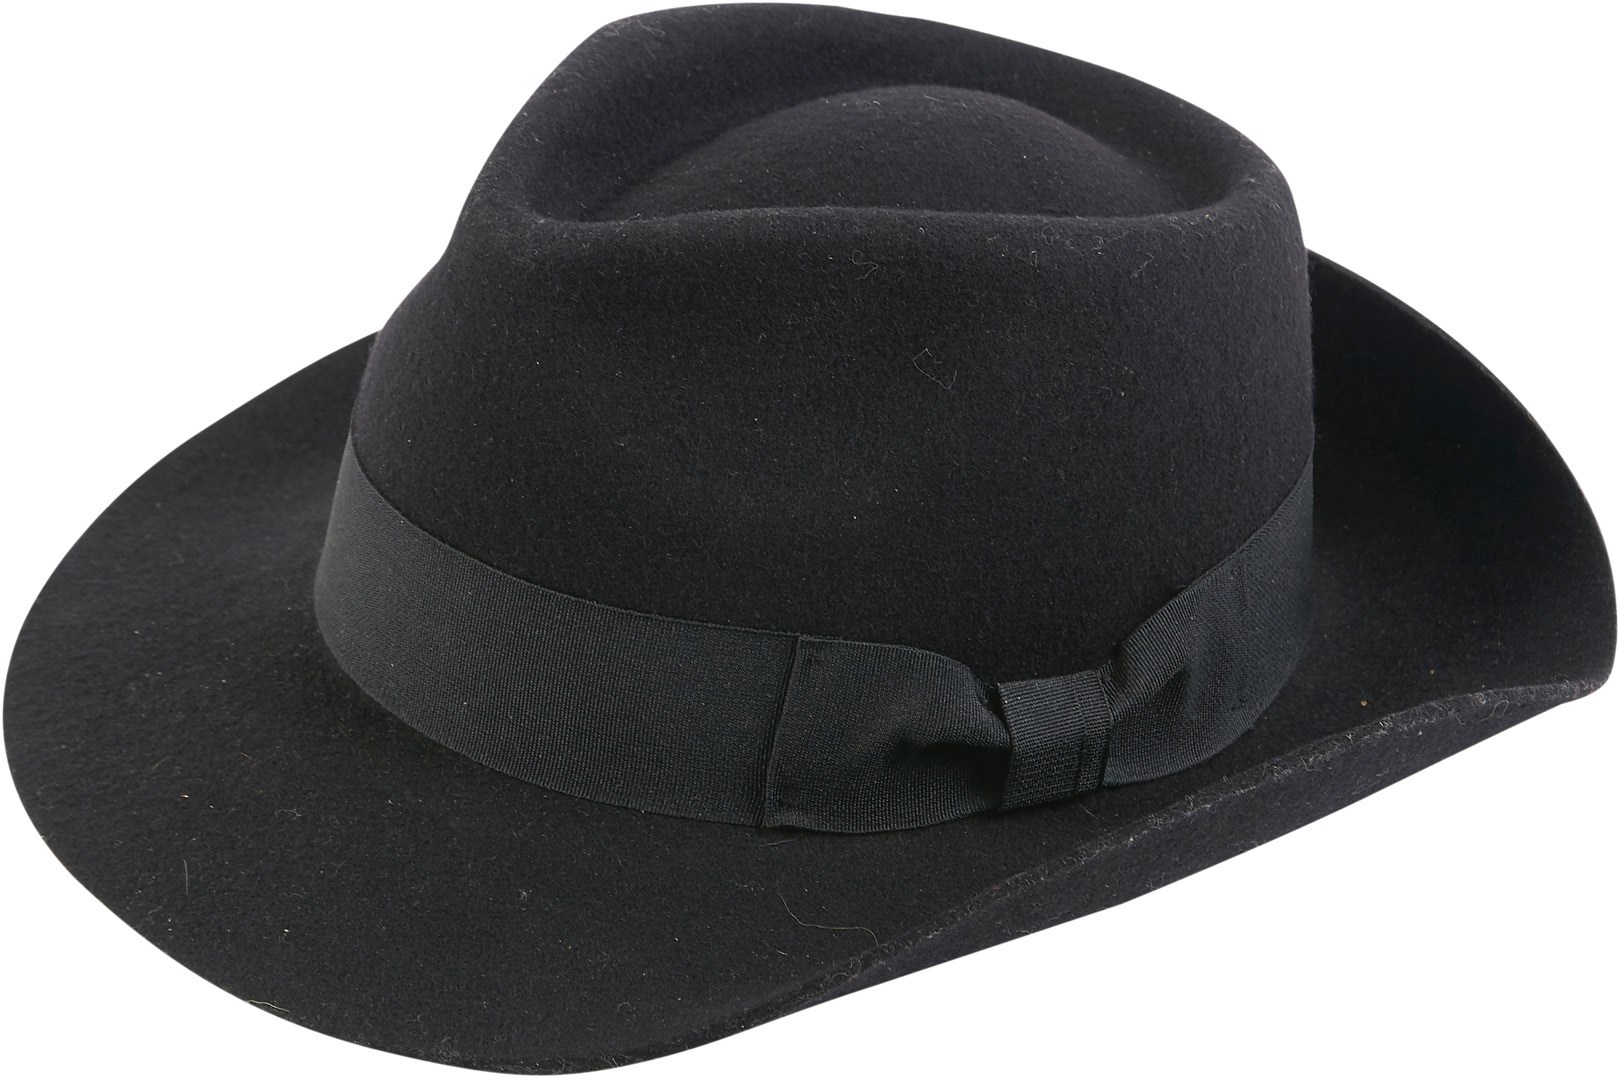 - 1996-97 Michael Jackson Fedora from his Production Manager